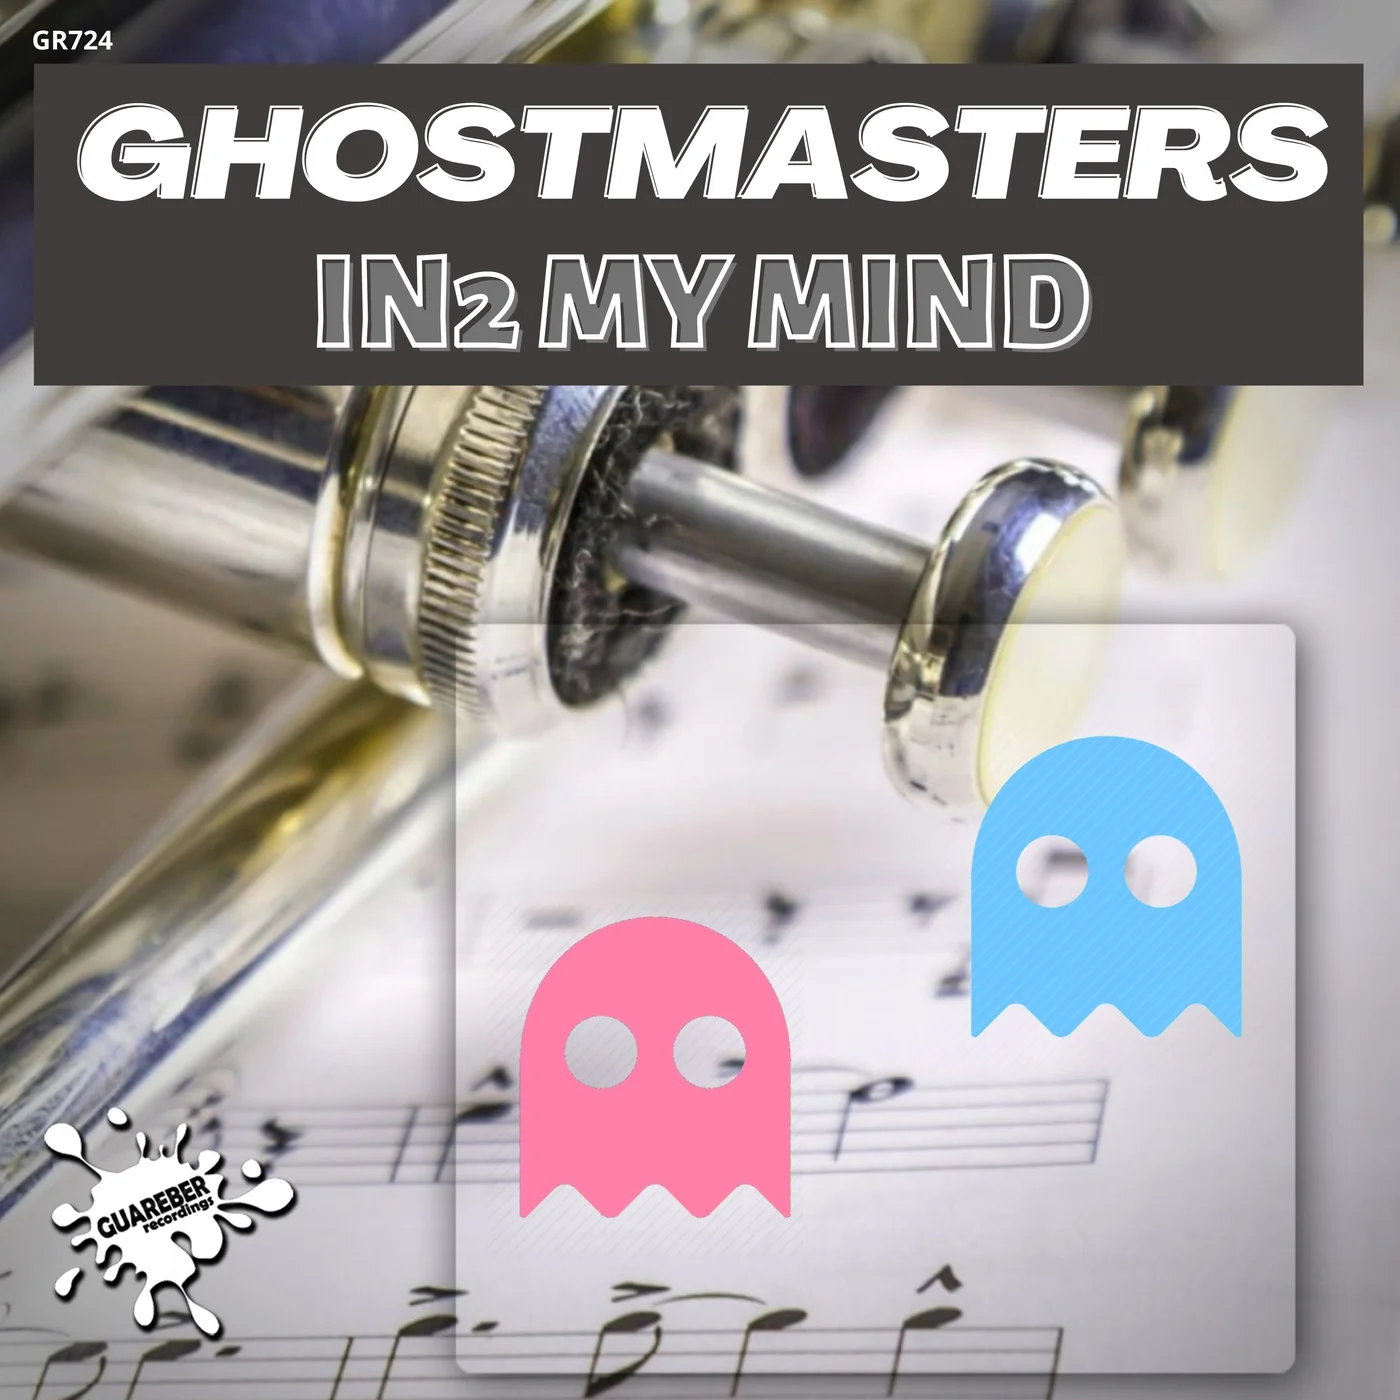 GhostMasters - In2 My Mind (Extended Mix)